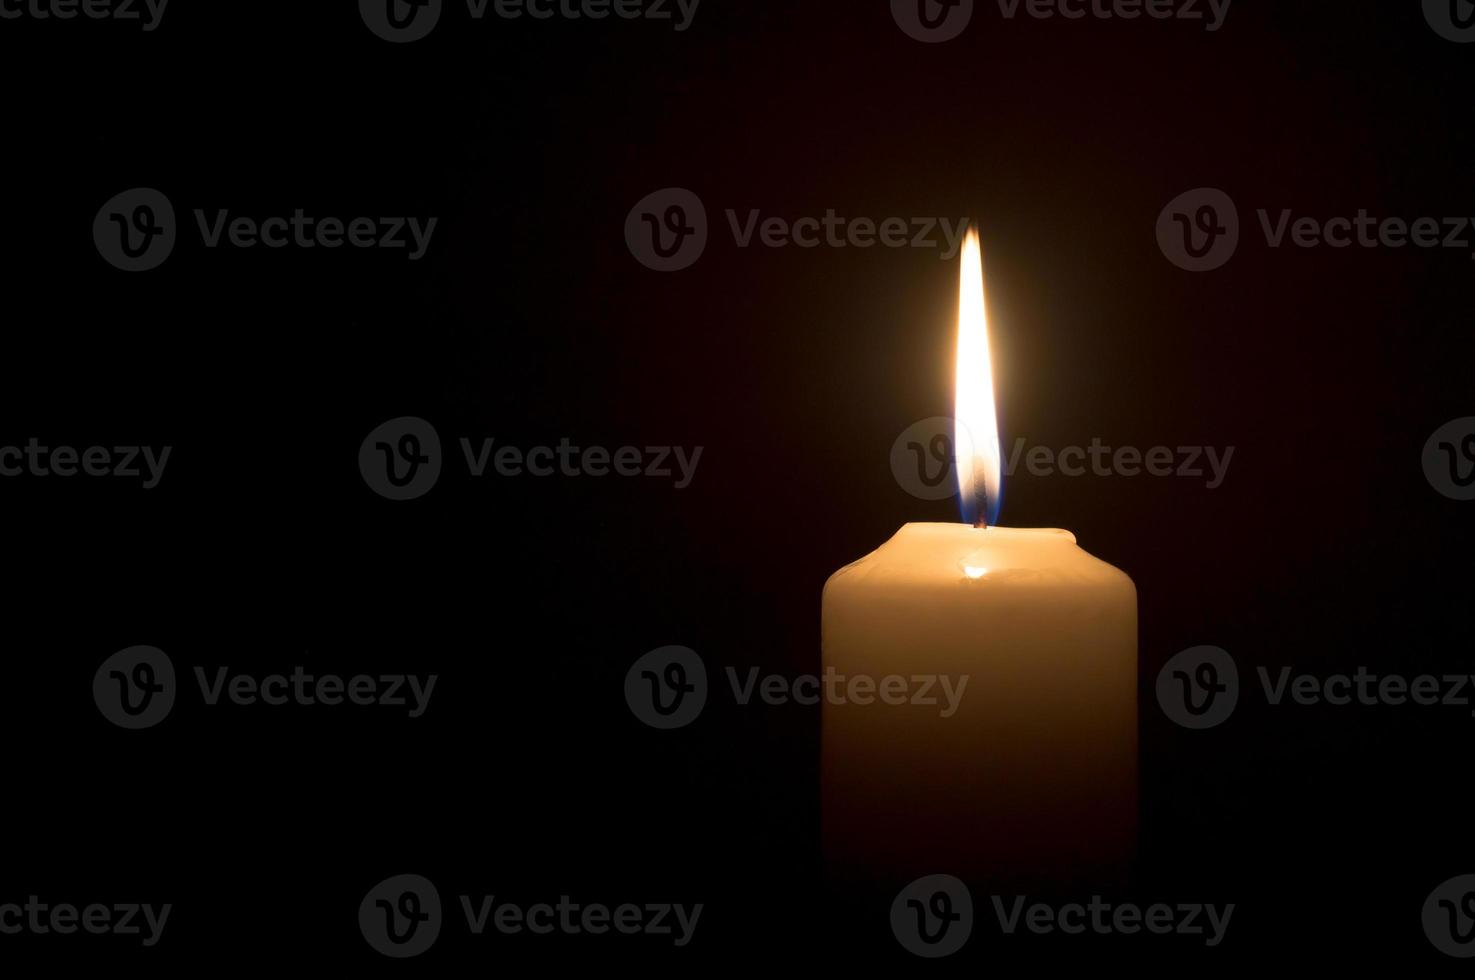 A single burning candle flame or light glowing on a white candle on black or dark background on table in church for Christmas, funeral or memorial service photo